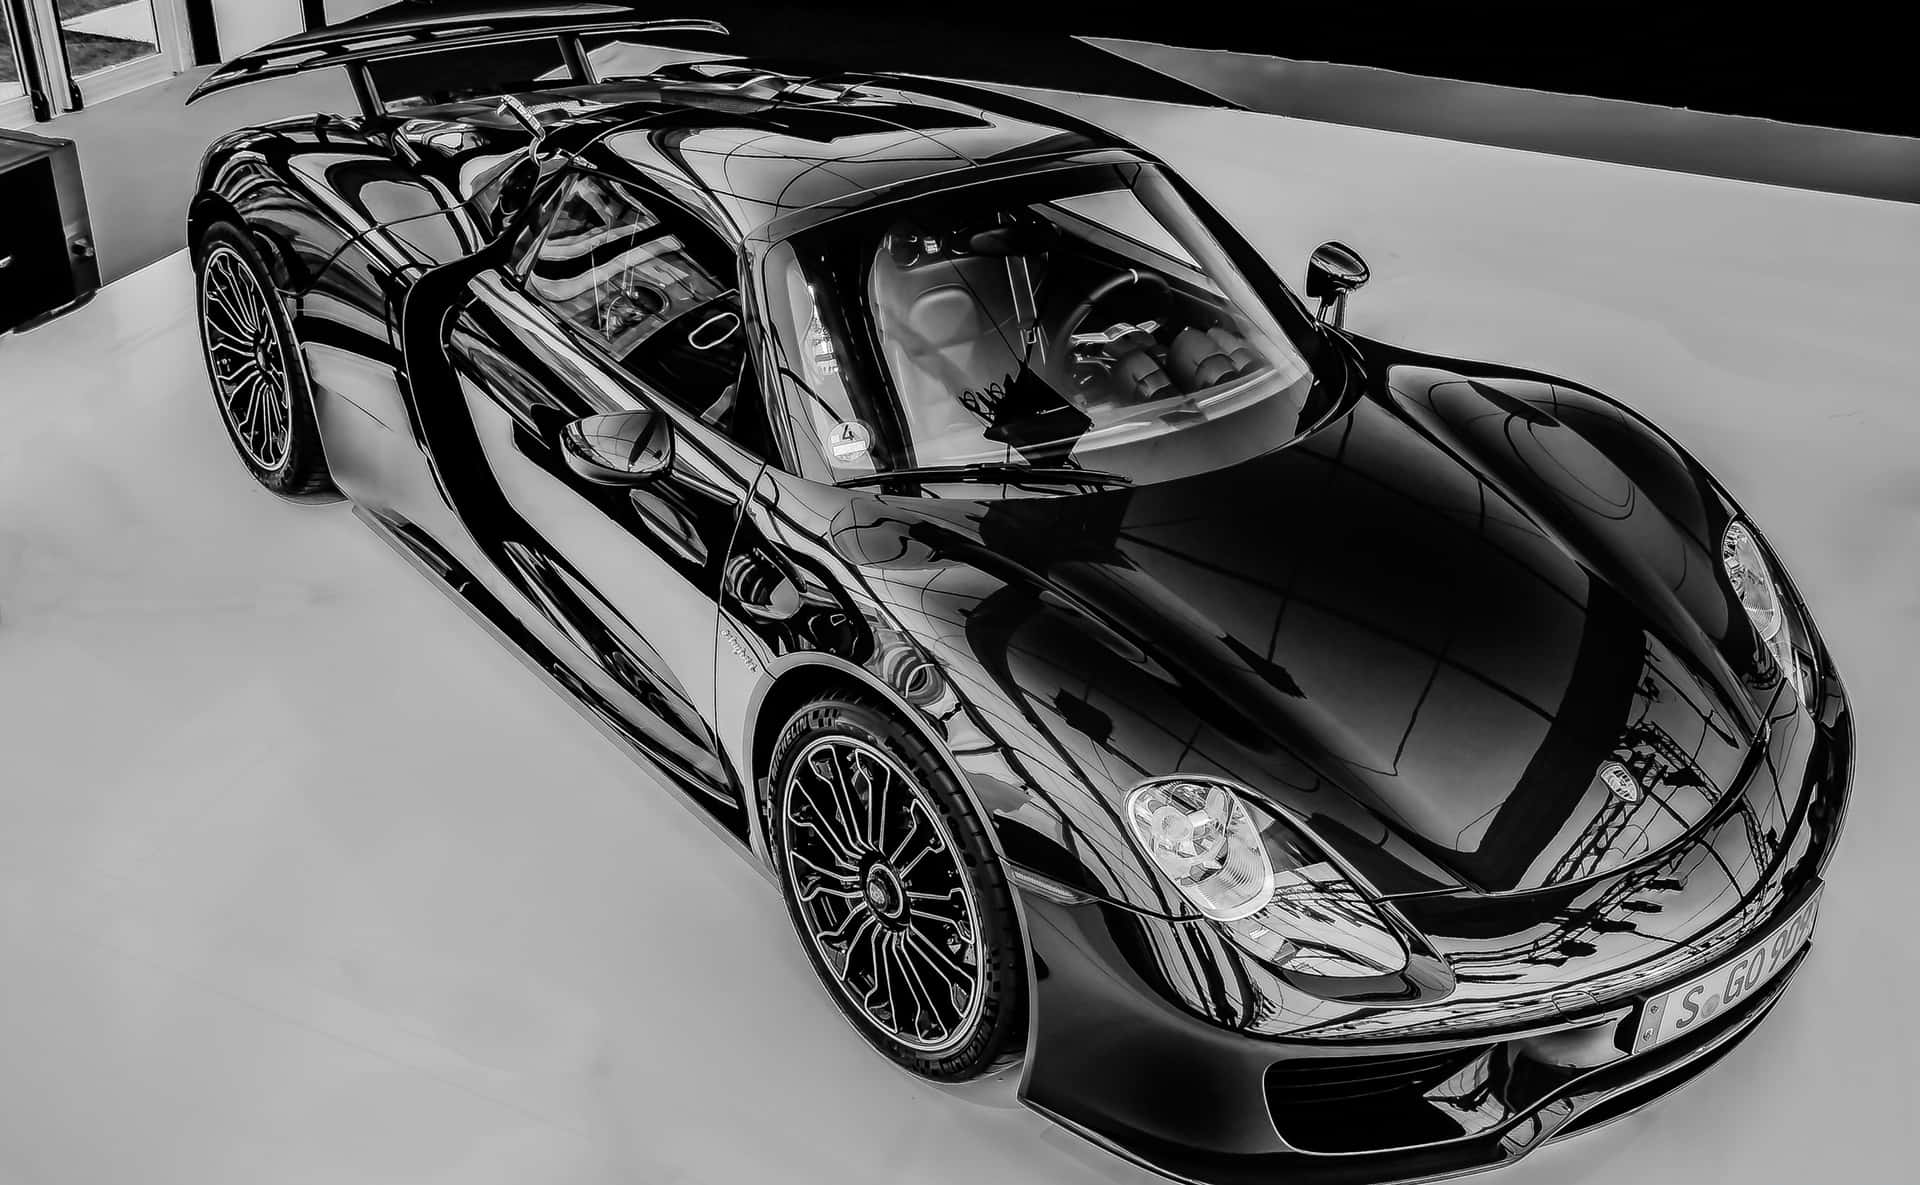 Stunning black and white sports car Wallpaper